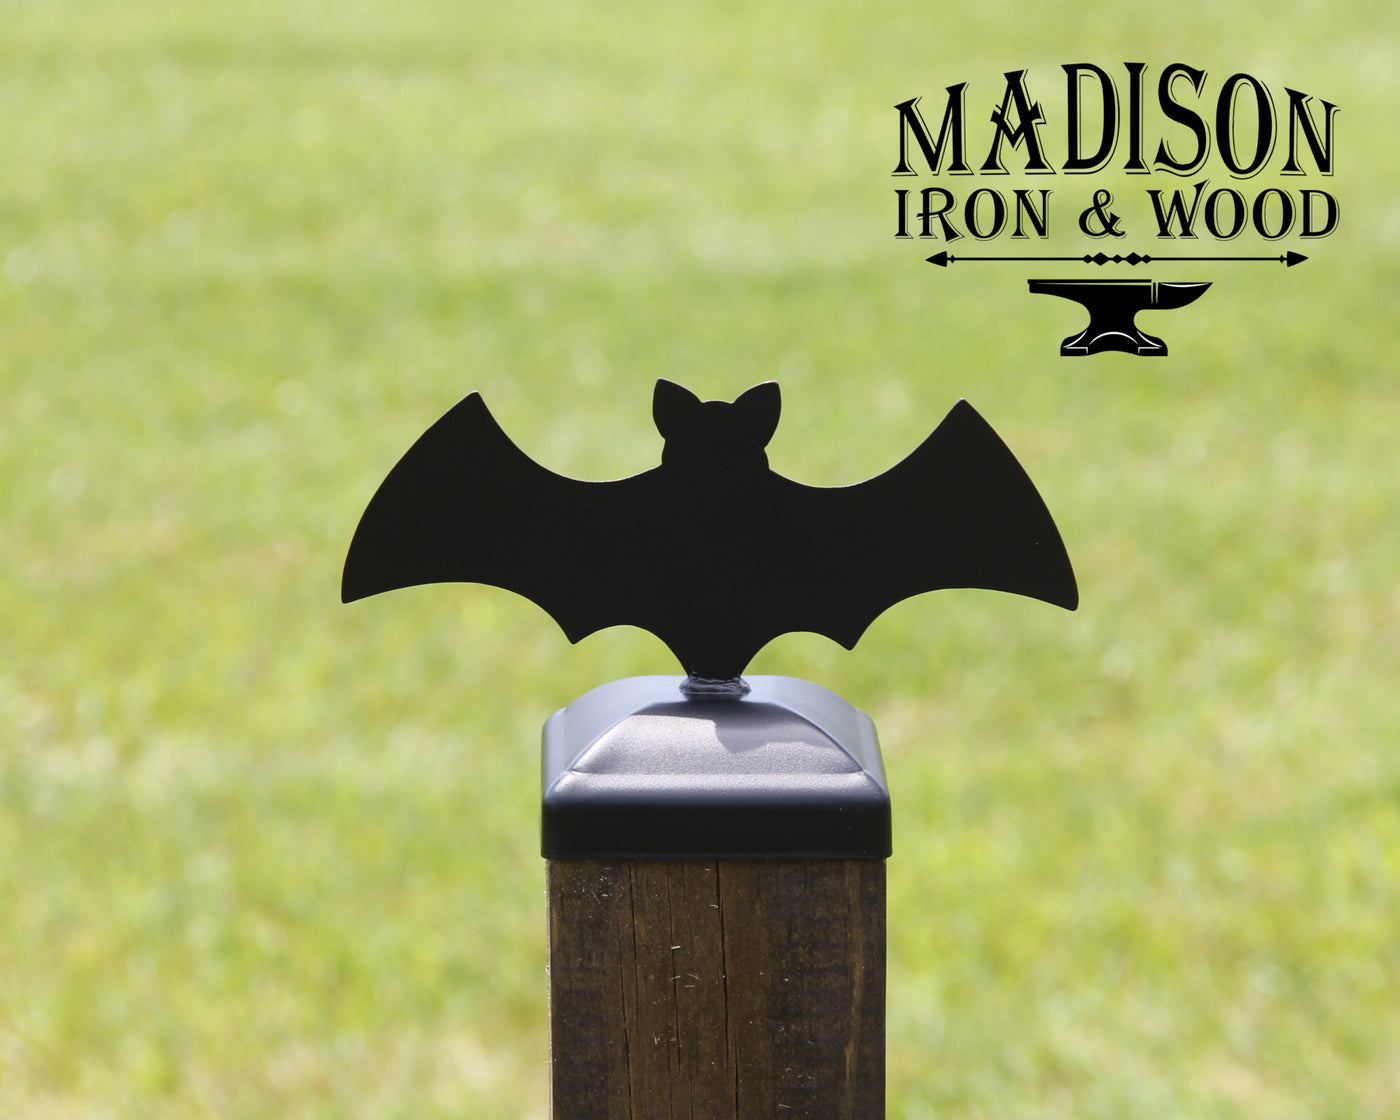 4x4 Bat Post Cap - Madison Iron and Wood - Post Cap - metal outdoor decor - Steel deocrations - american made products - veteran owned business products - fencing decorations - fencing supplies - custom wall decorations - personalized wall signs - steel - decorative post caps - steel post caps - metal post caps - brackets - structural brackets - home improvement - easter - easter decorations - easter gift - easter yard decor